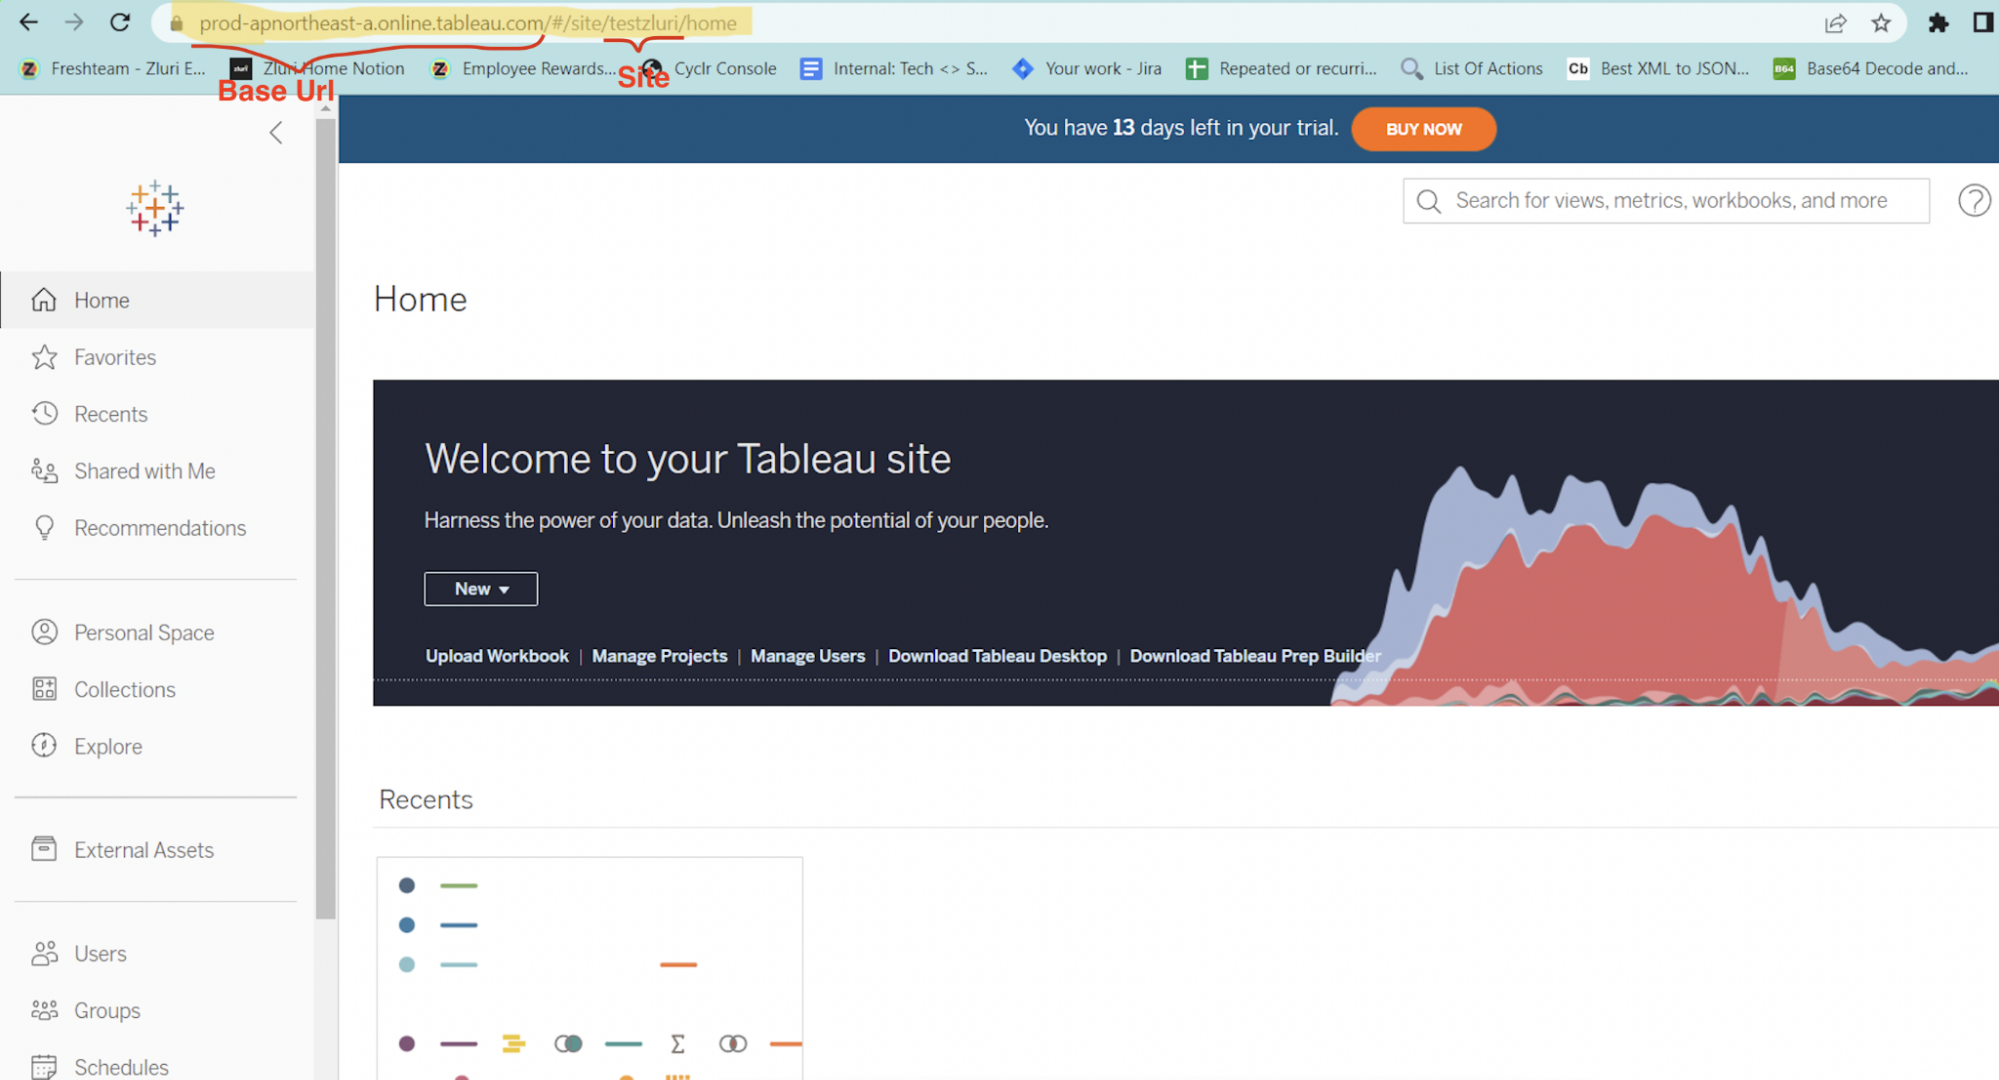 Integrating Tableau with Zluri 